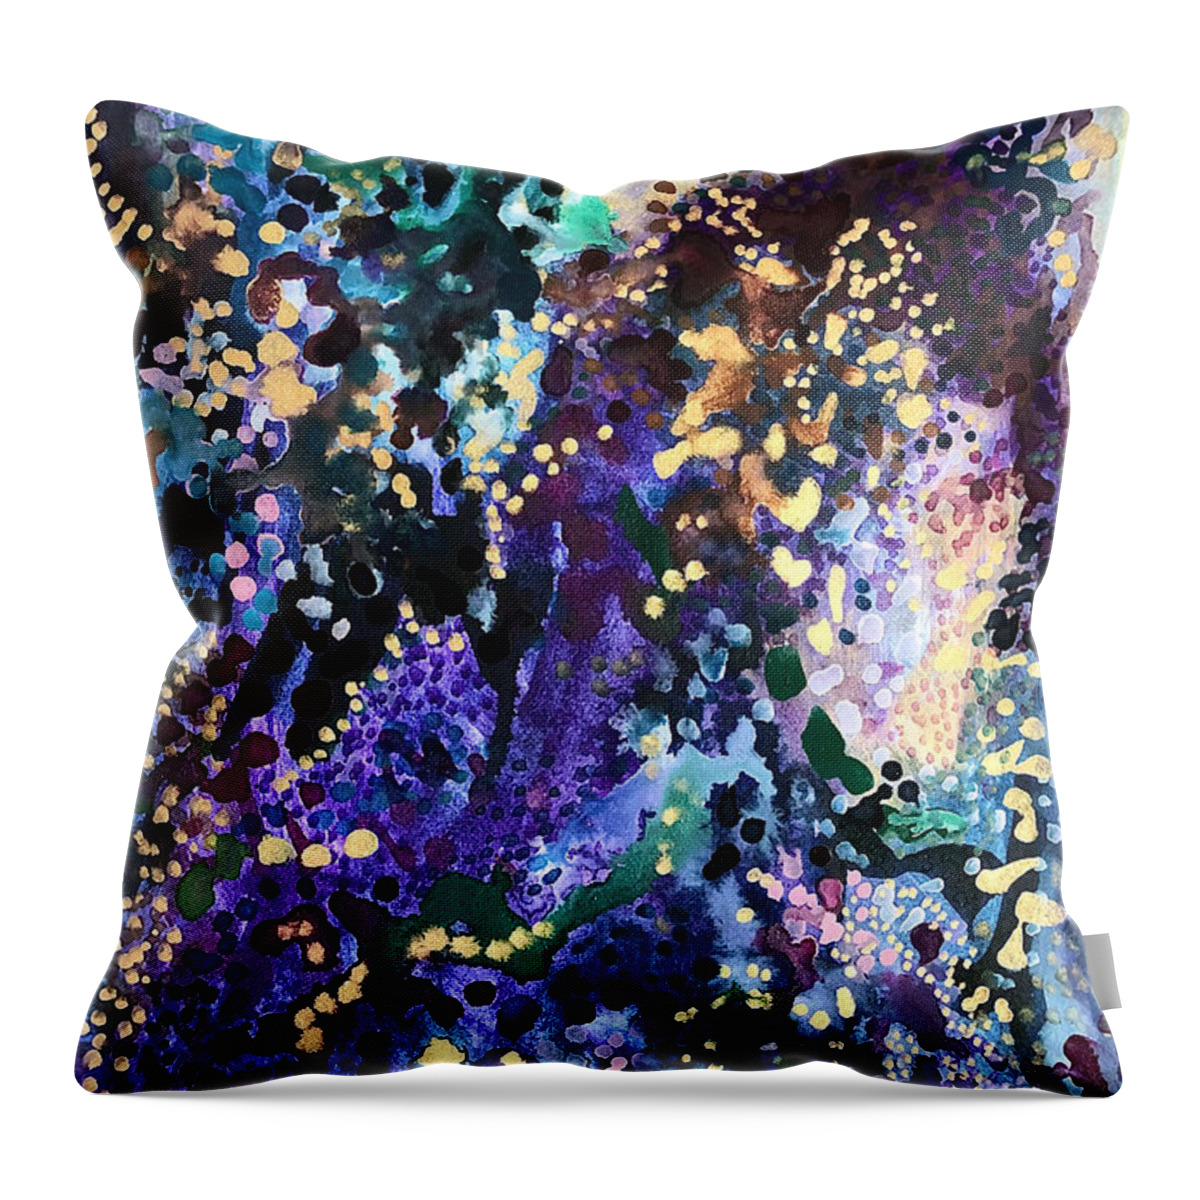  Throw Pillow featuring the painting The Realm by Polly Castor